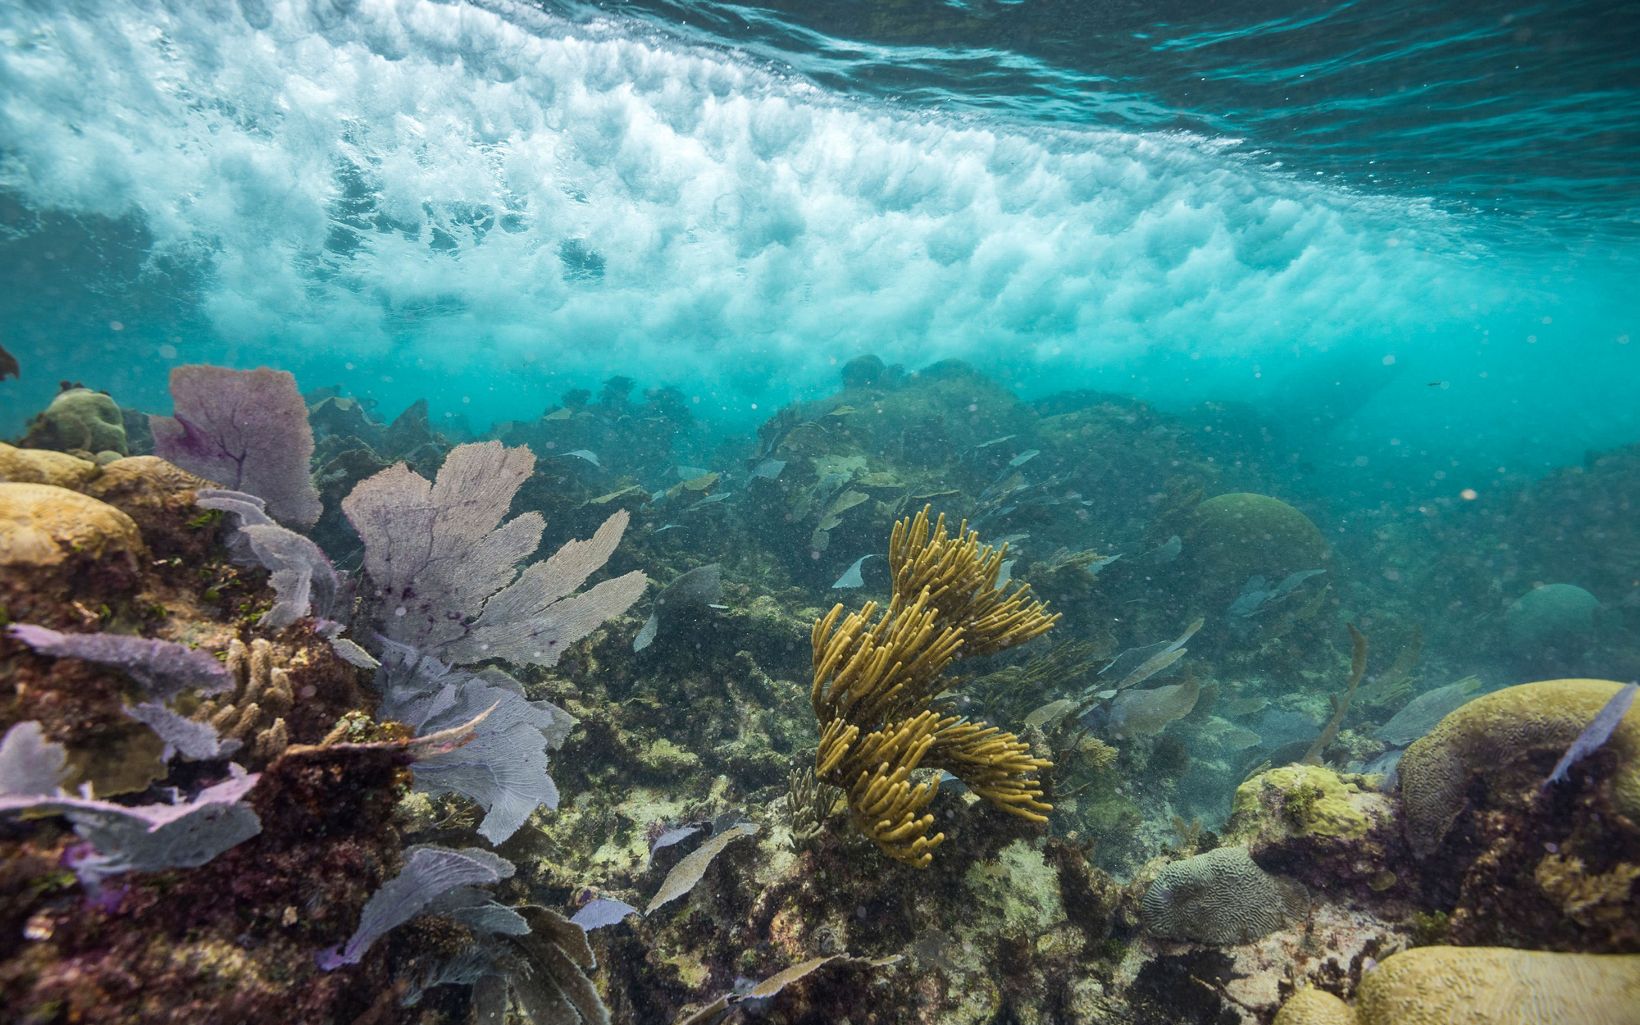 Mesoamerican Reef A healthy coral reef can absorb up to 97% of a wave’s force, helping to protect coastal communities. © Jennifer Adler